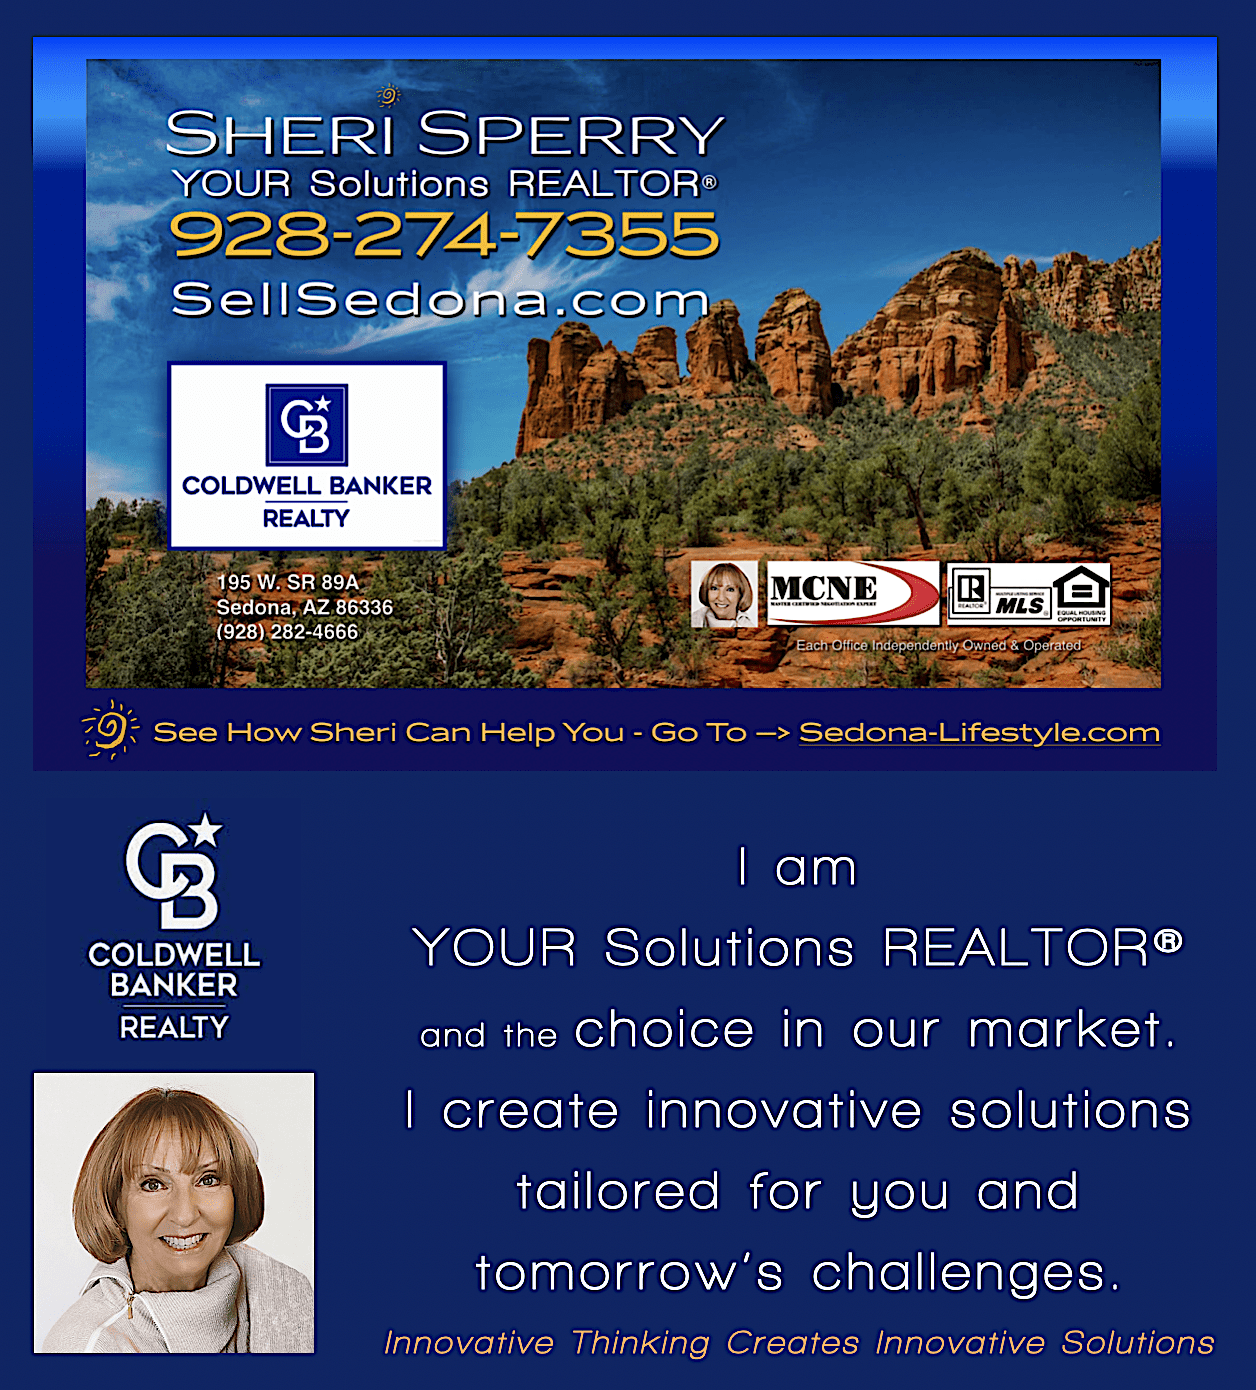 Sheri Sperry is YOUR Solutions REALTOR for Coldwell Banker Realty and SellSedona.com